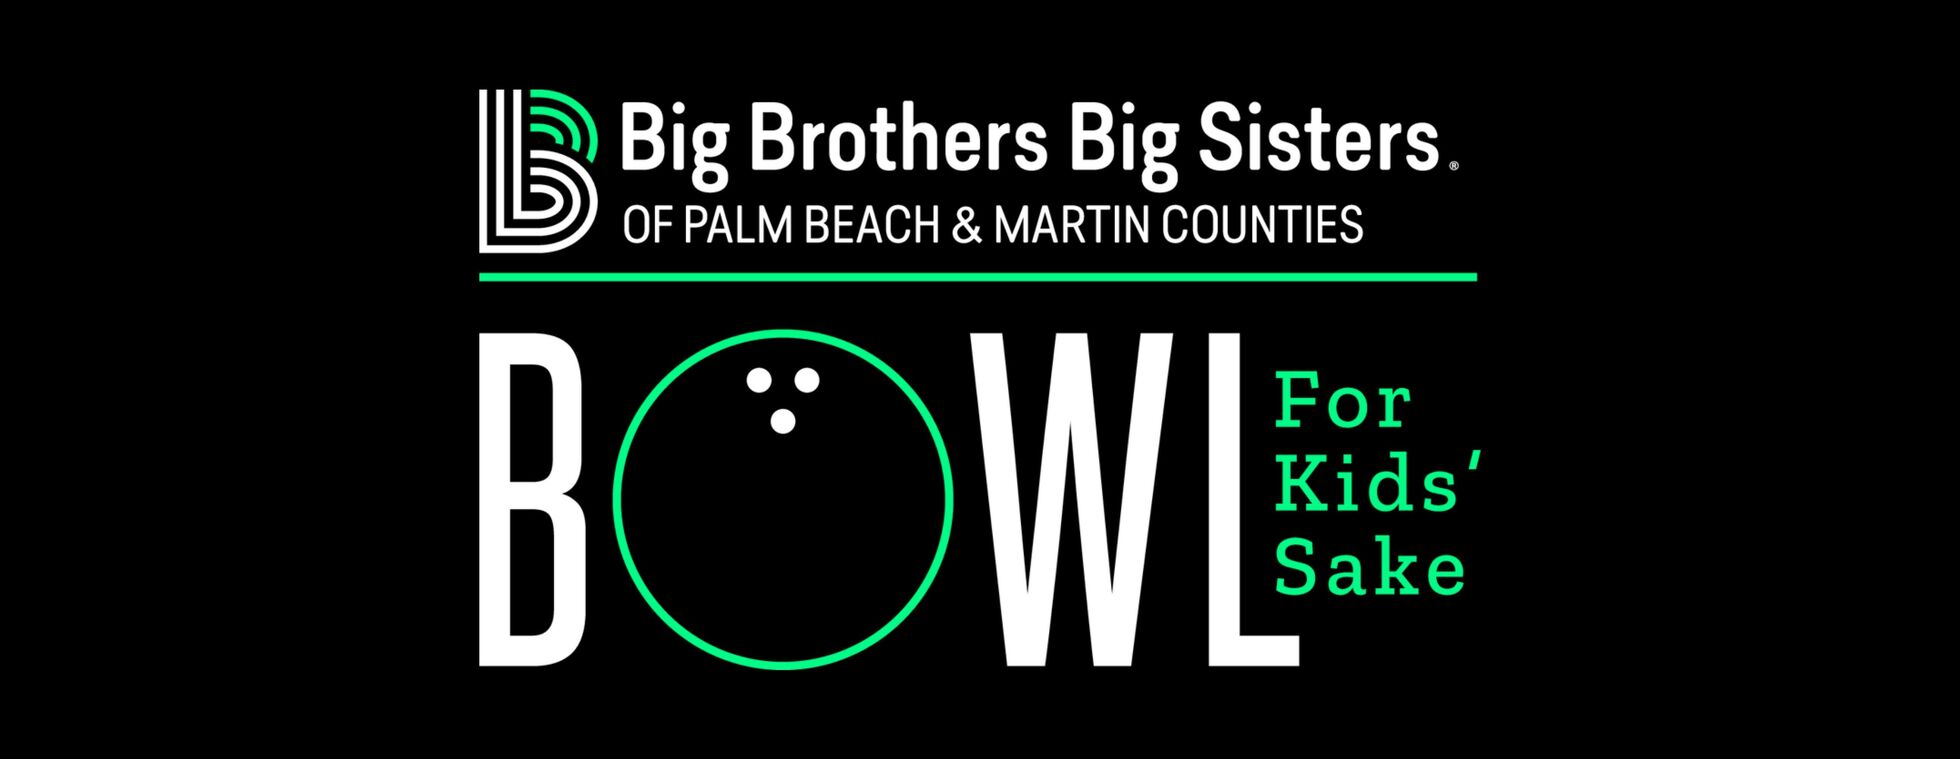 Big Brothers Big Sisters of Palm Beach and Martin Counties